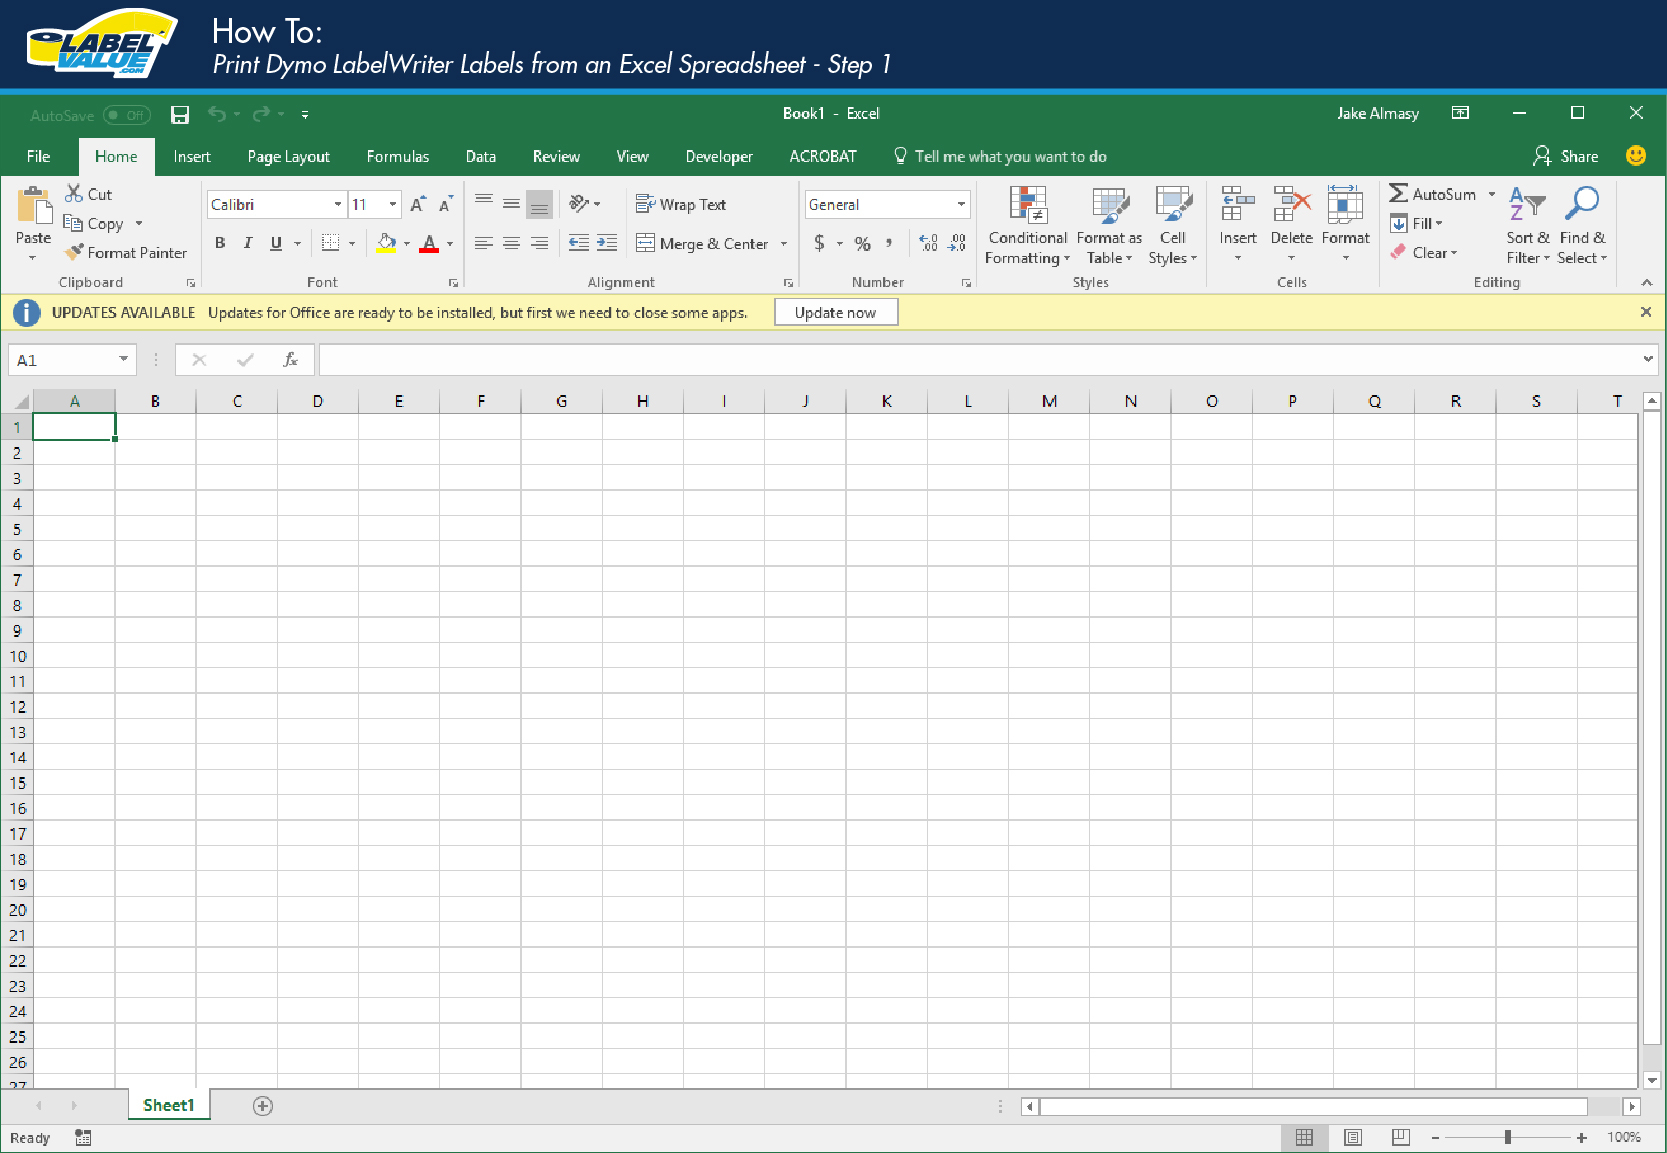 create-labels-from-excel-spreadsheet-db-excel